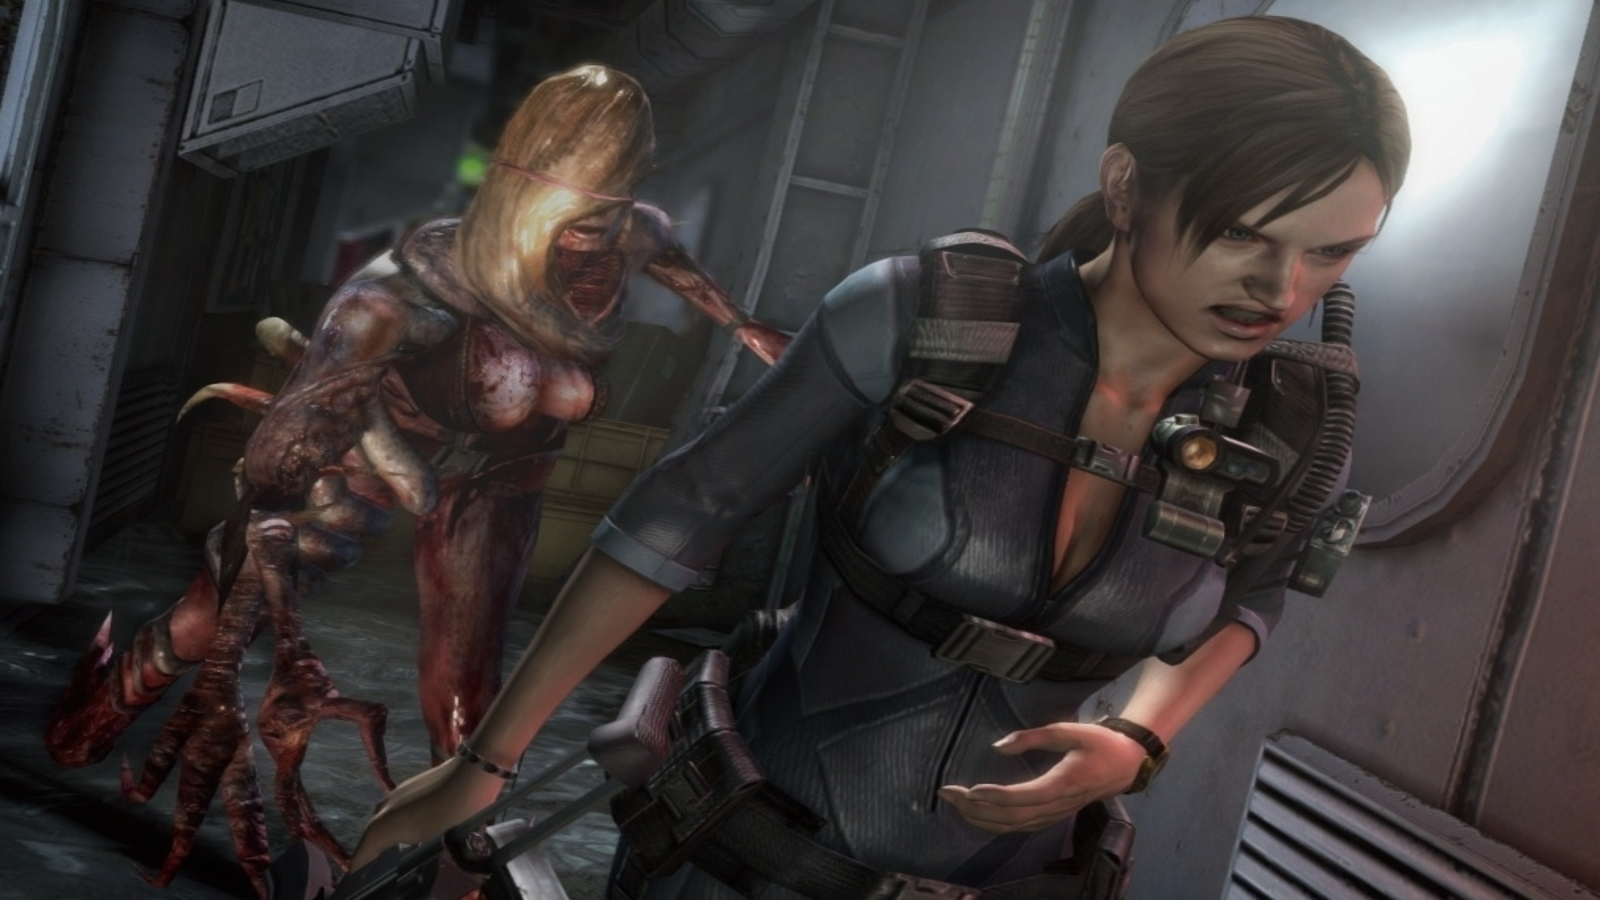 The Brand-New Resident Evil Board Game Is On Sale At  - GameSpot